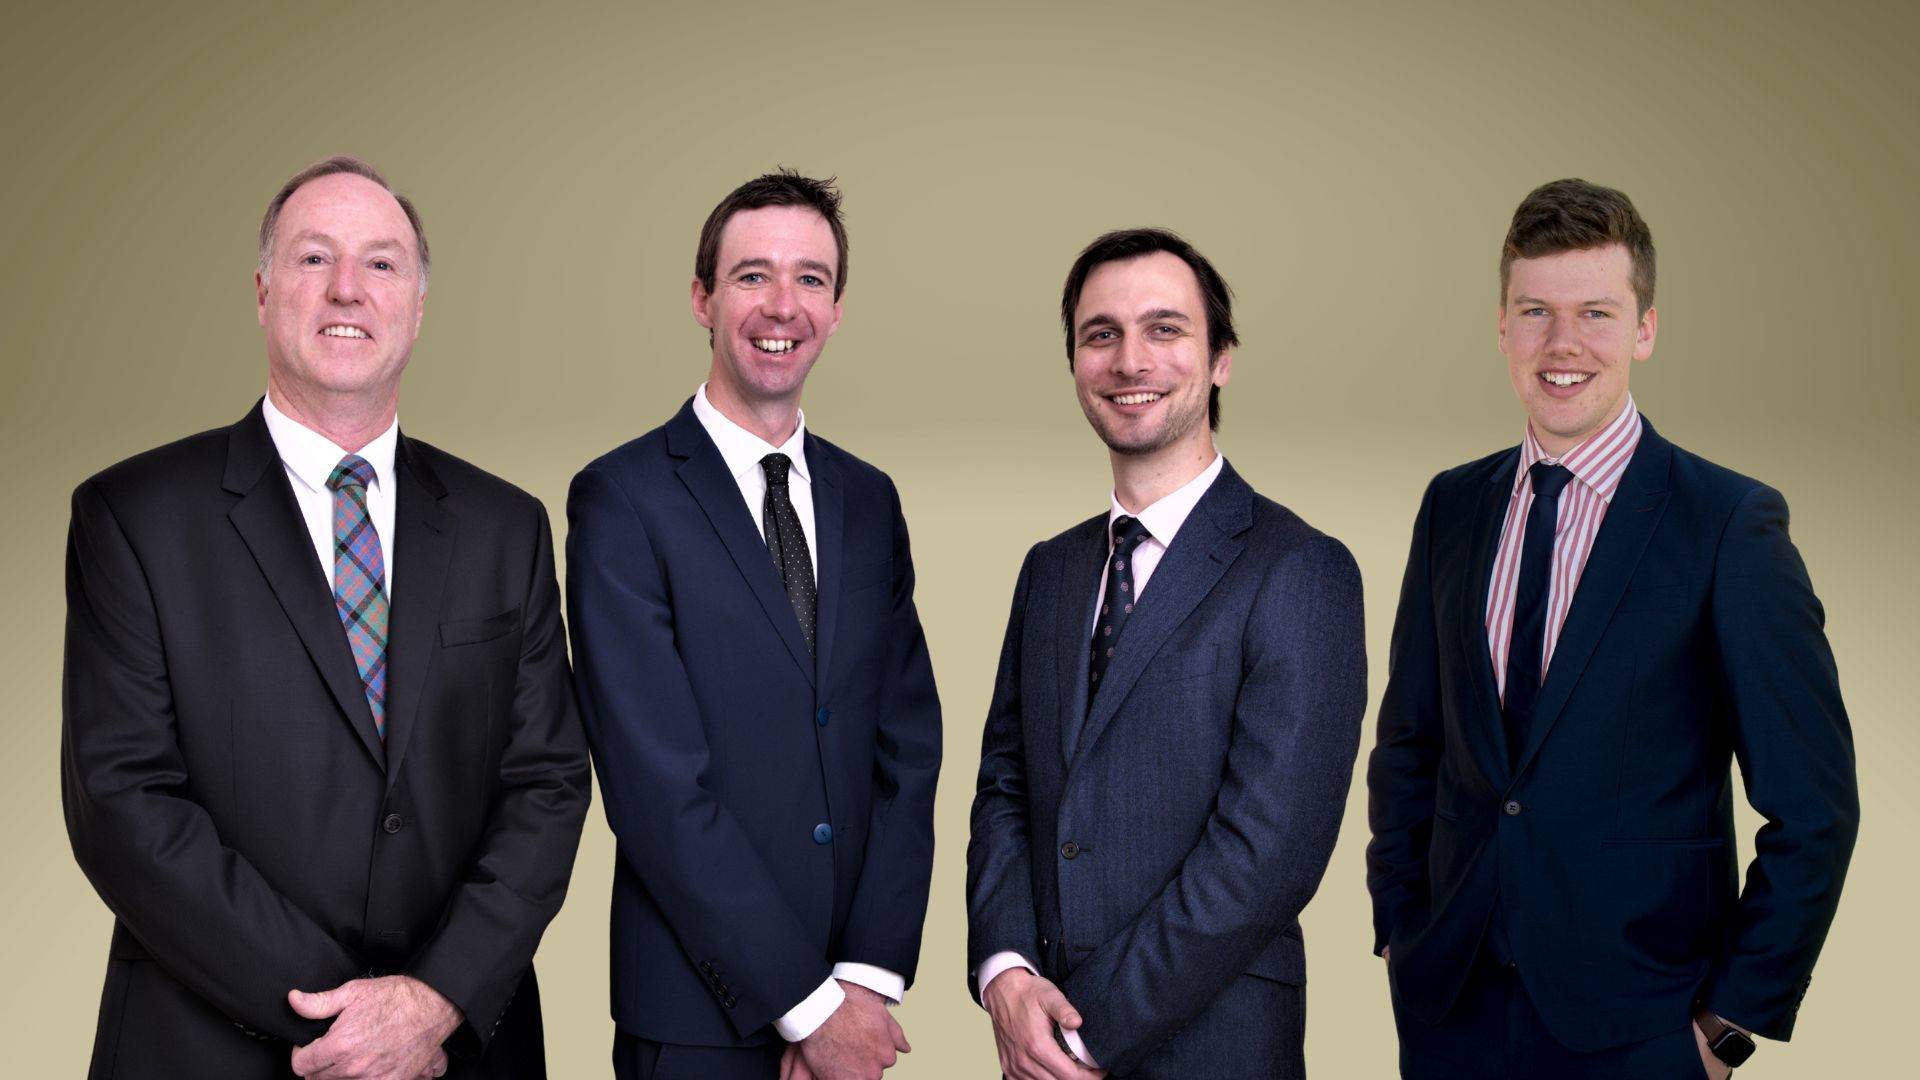 A team of legal experts